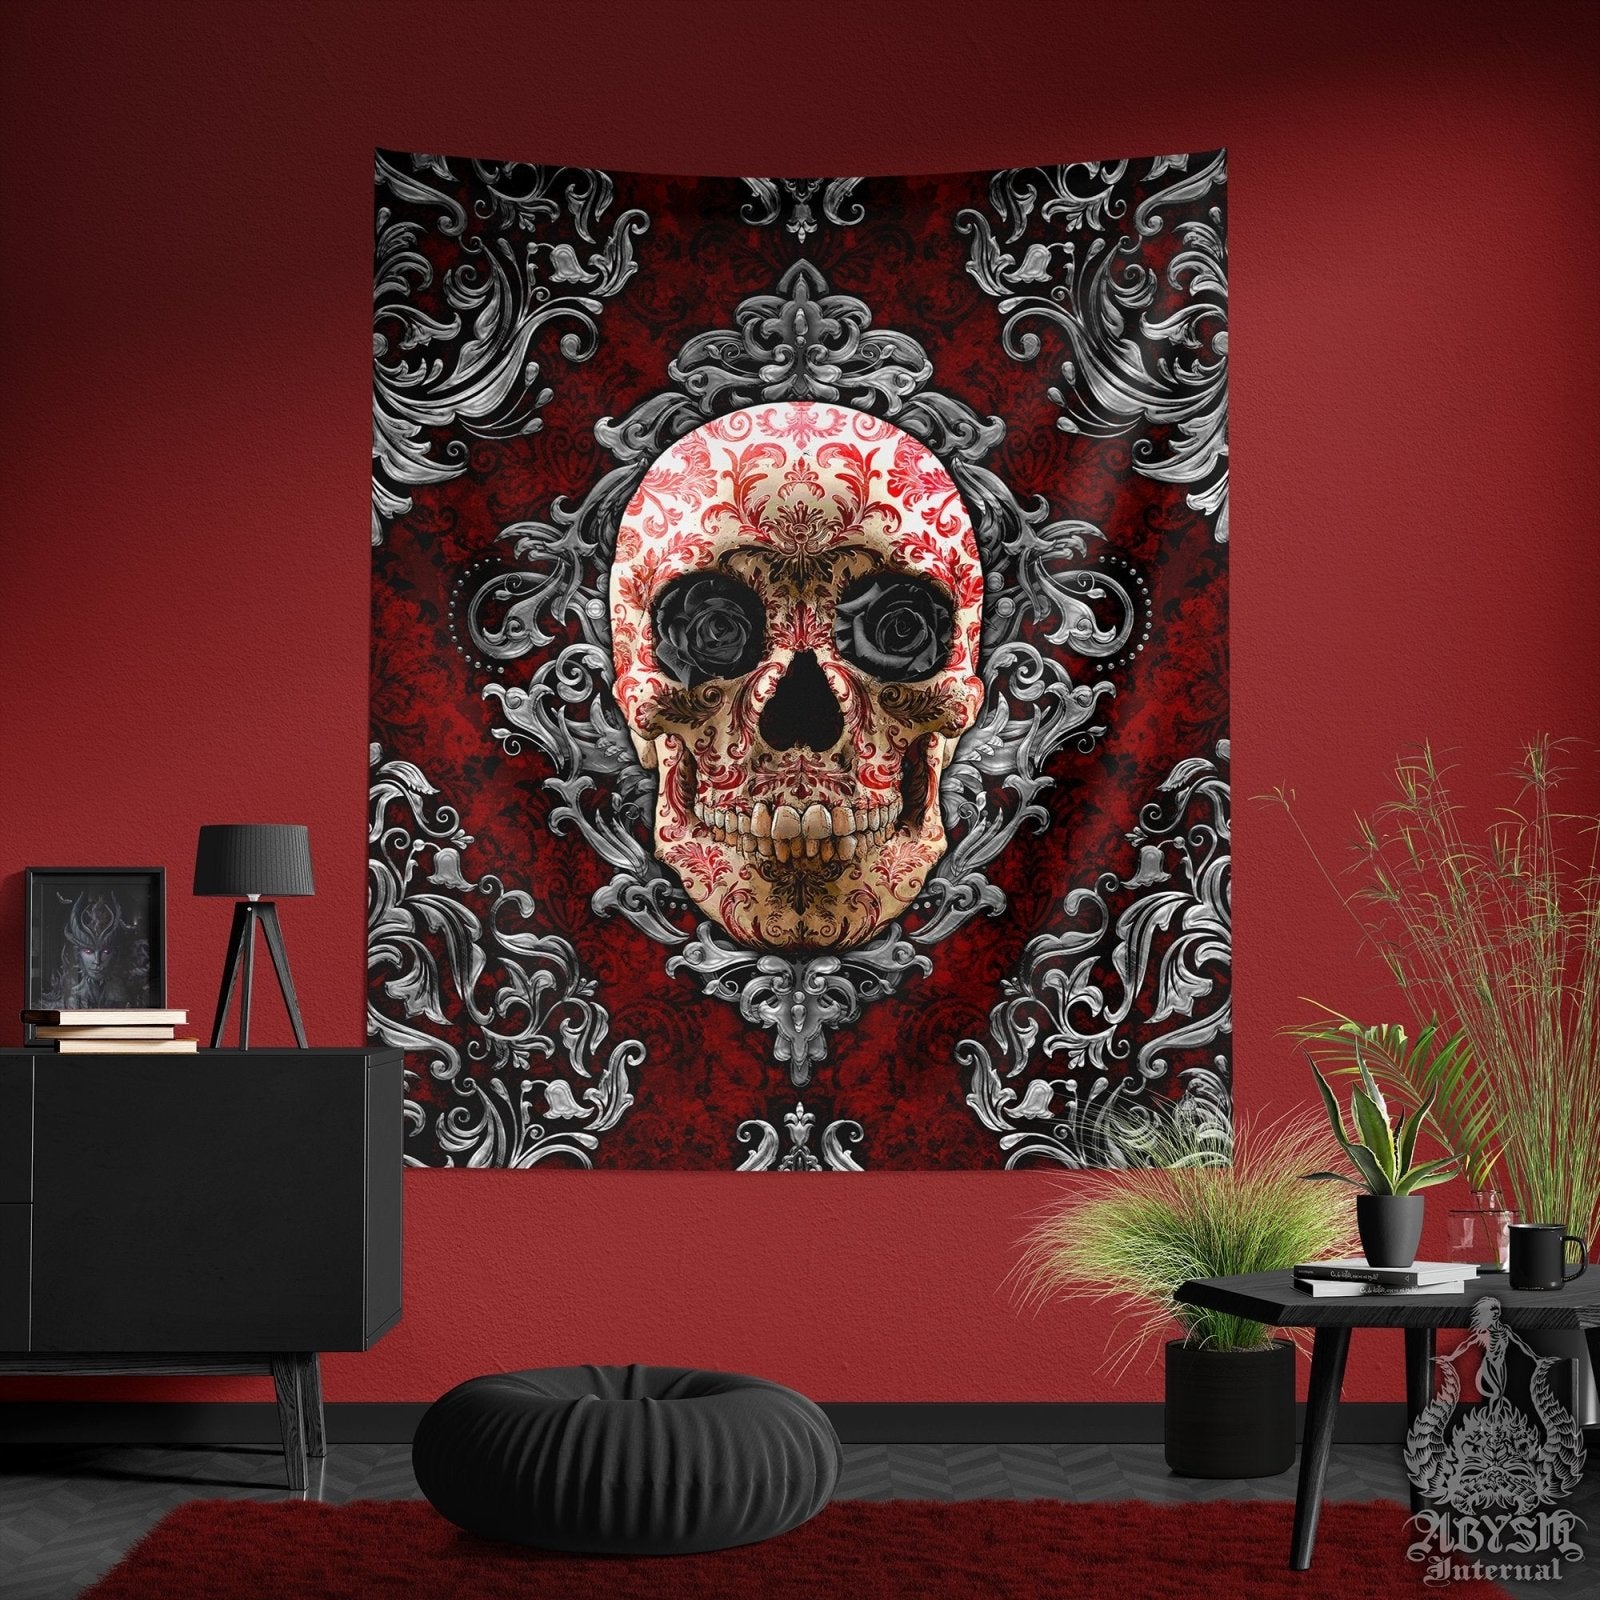 Gothic Tapestry, Skull Wall Hanging, Macabre Home Decor, Art Print - Goth & Black Roses - Abysm Internal